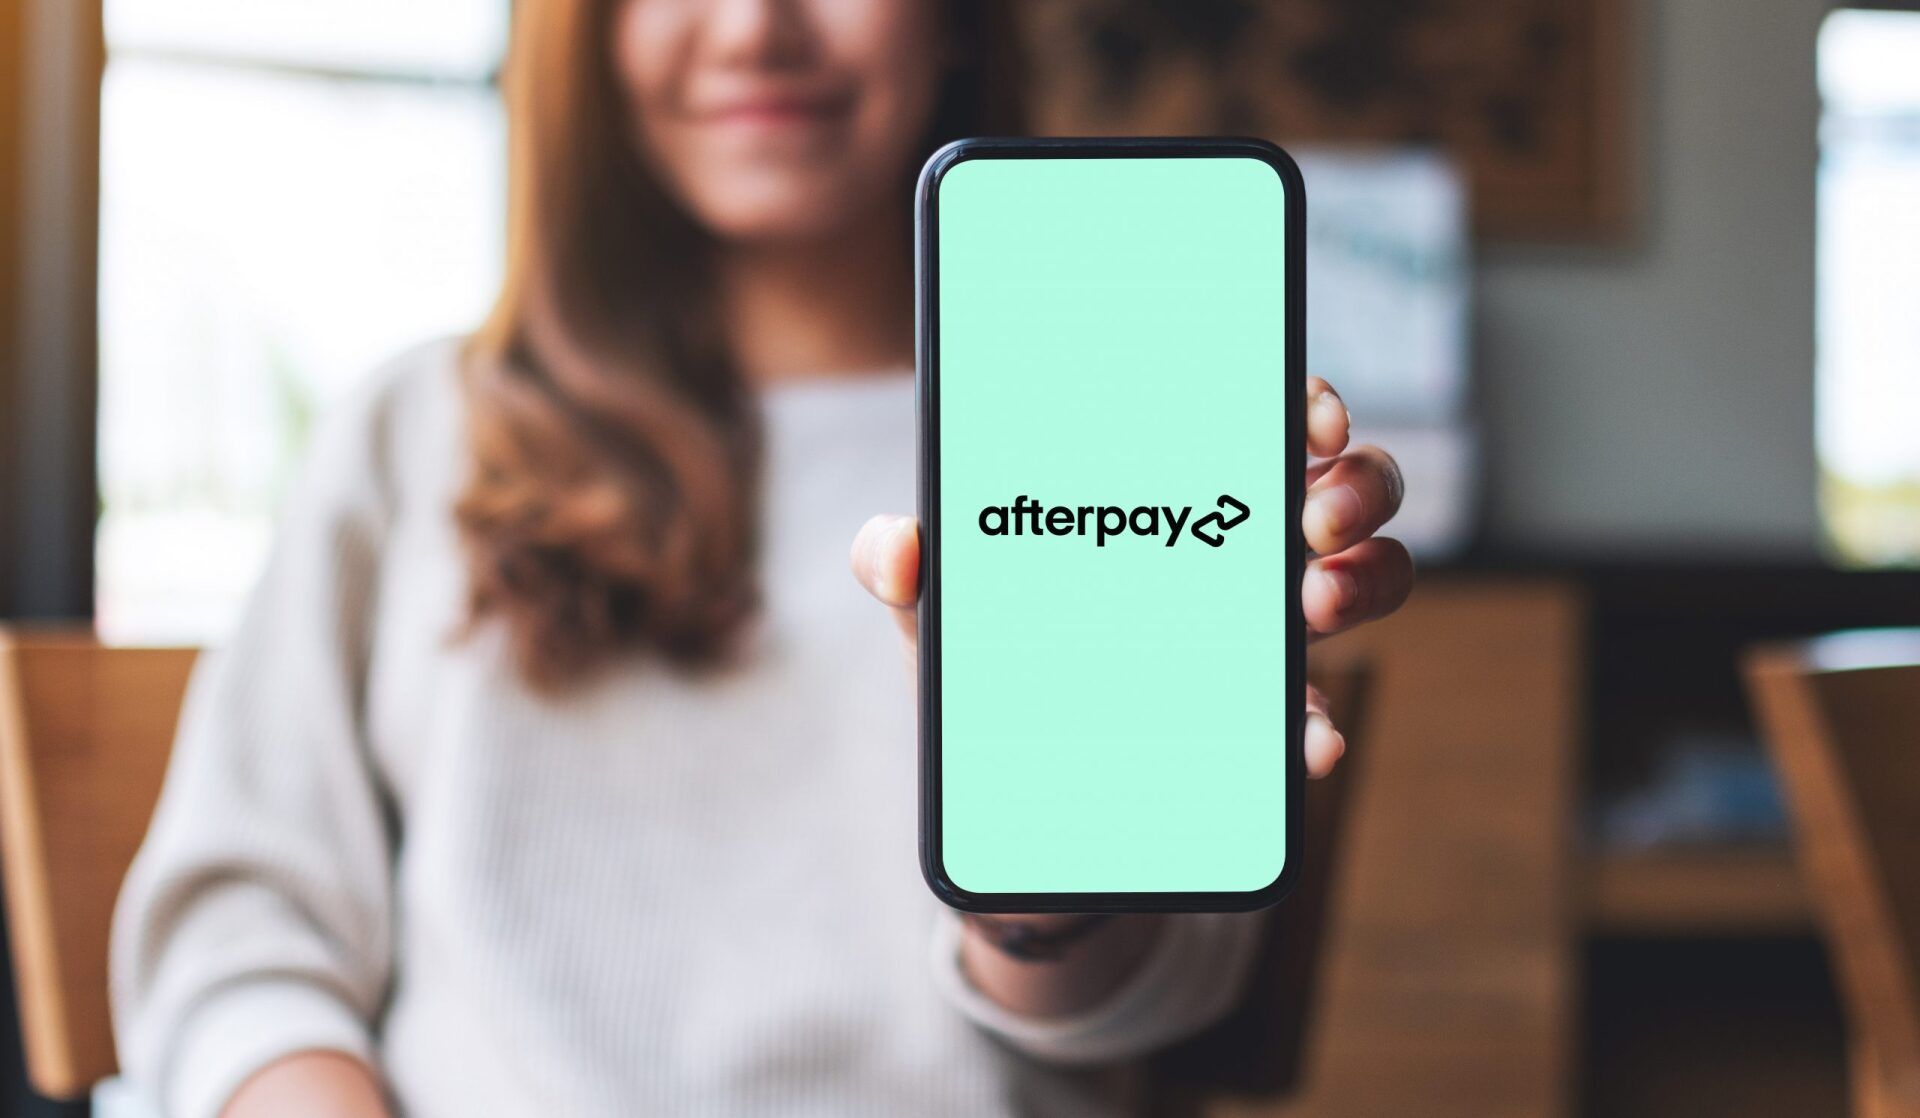 Square announces plans to acquire Afterpay for US$29 bn